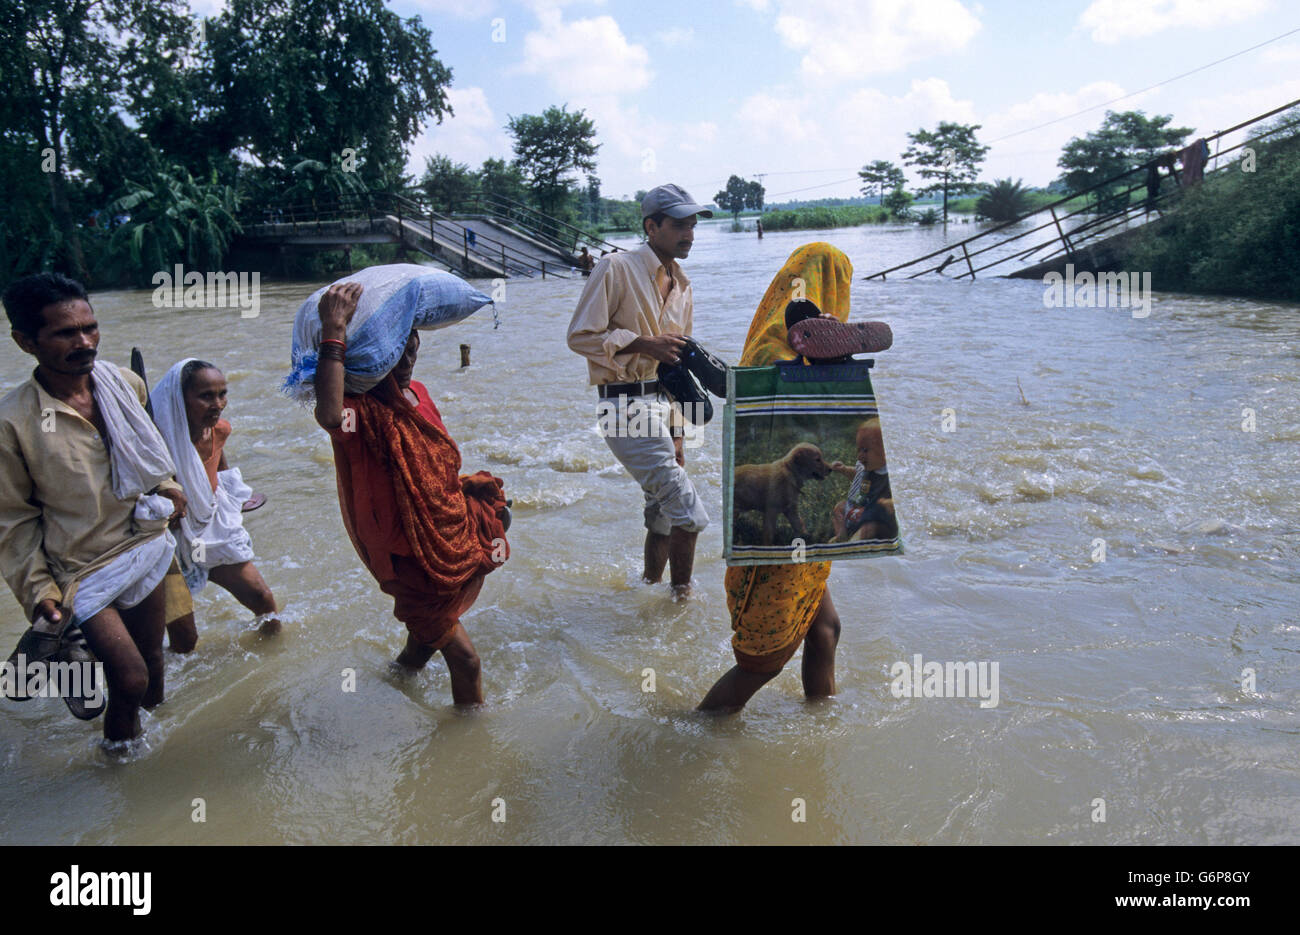 INDIA, Bihar, submergence at Bagmati river a branch of Ganges / Ganga River due to heavy monsoon rains and melting Himalaya glaciers, broken bridge and damaged road, people walking in the water, climate change and global warming effects Stock Photo